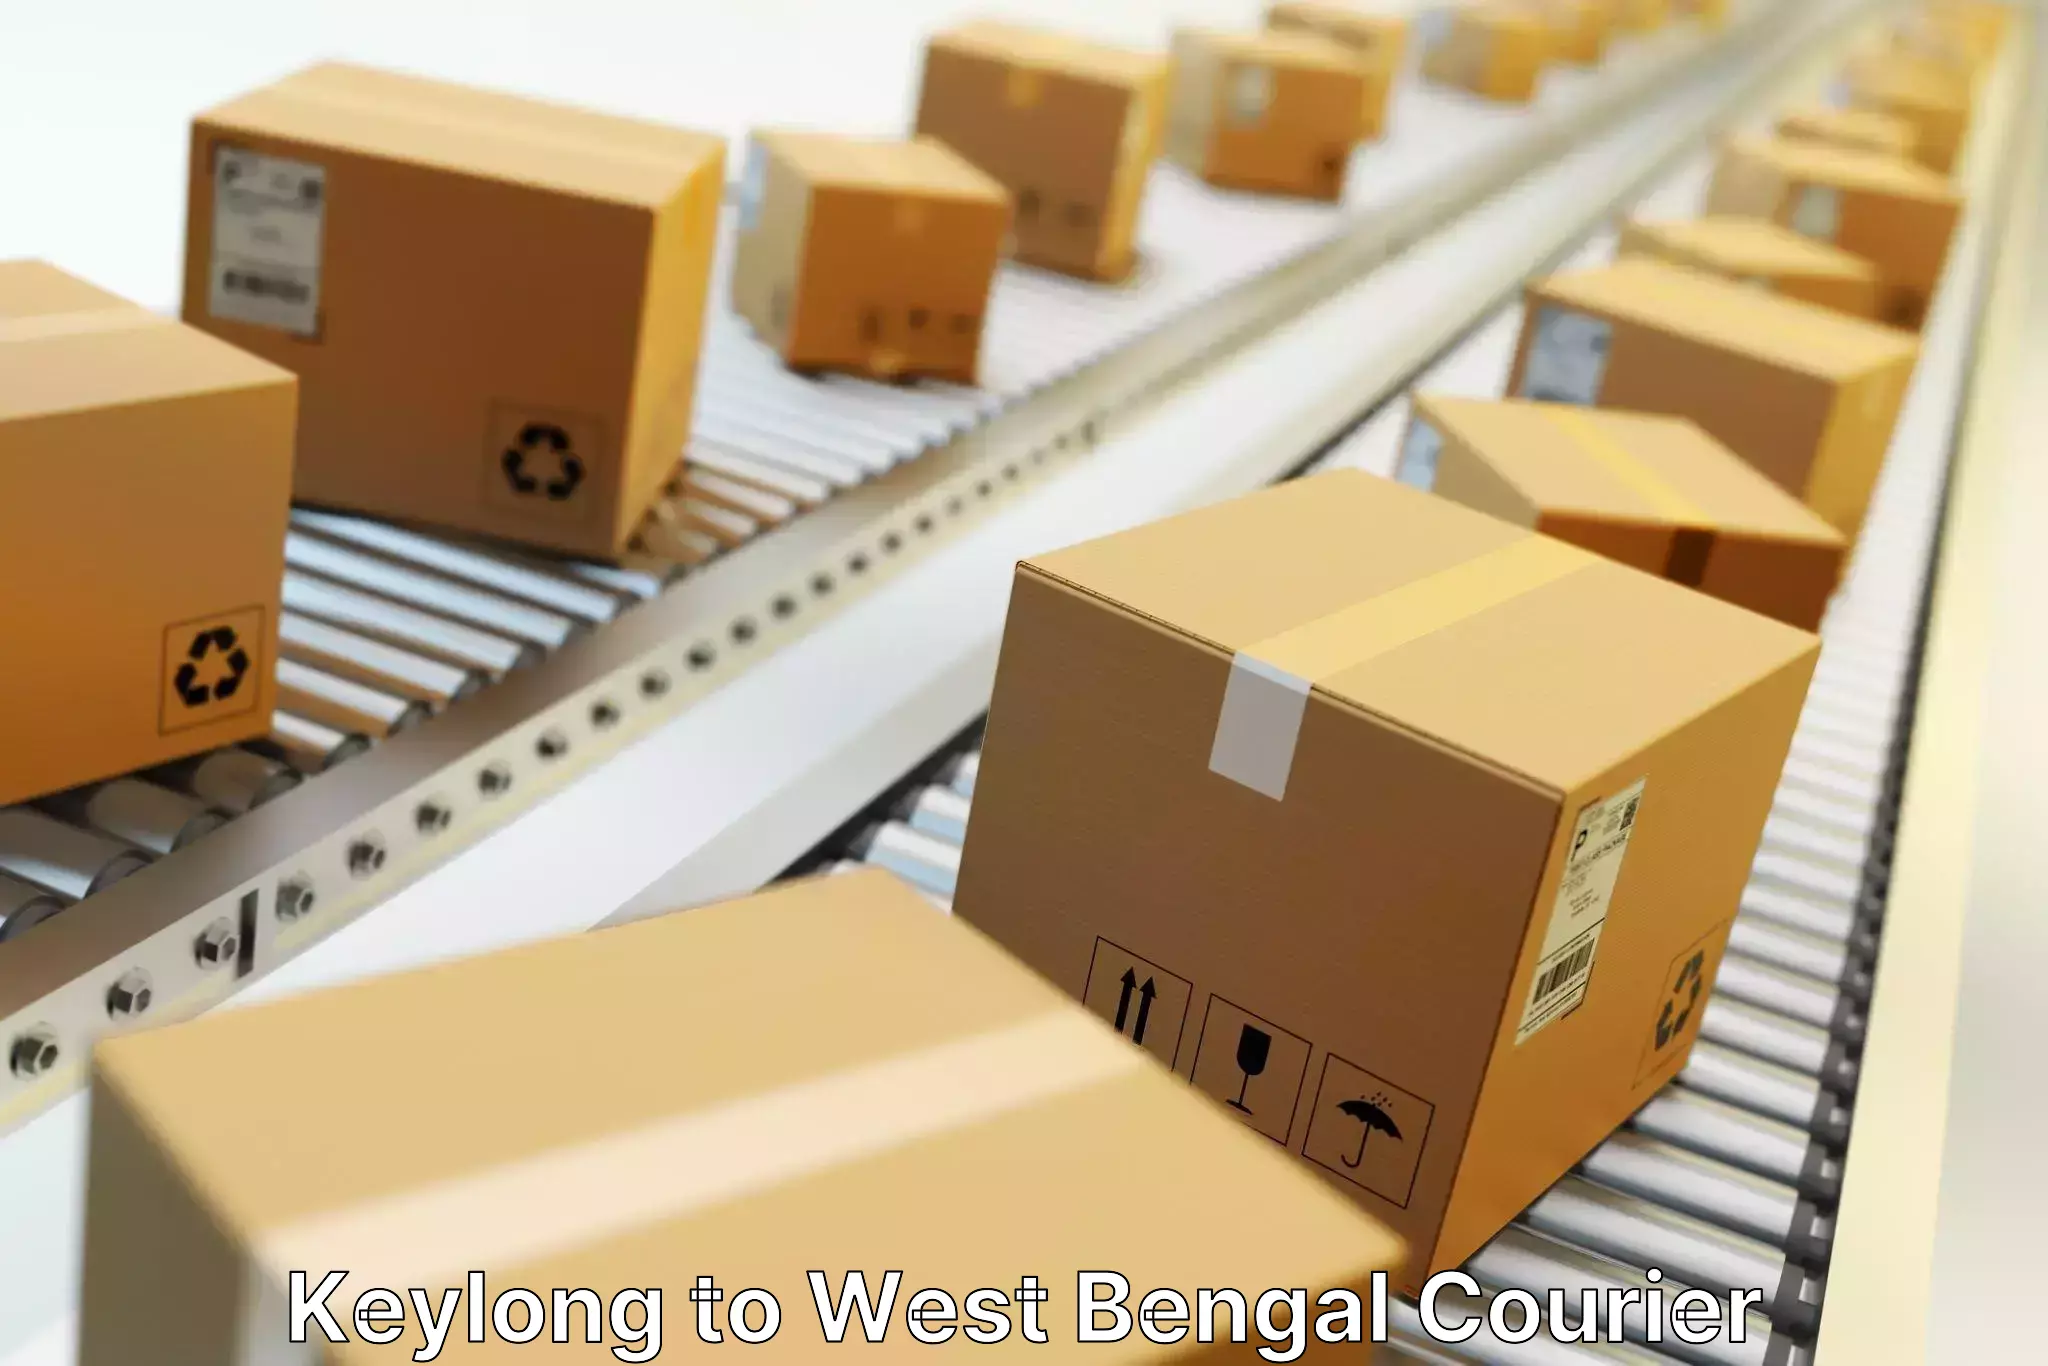 Express delivery capabilities Keylong to West Bengal